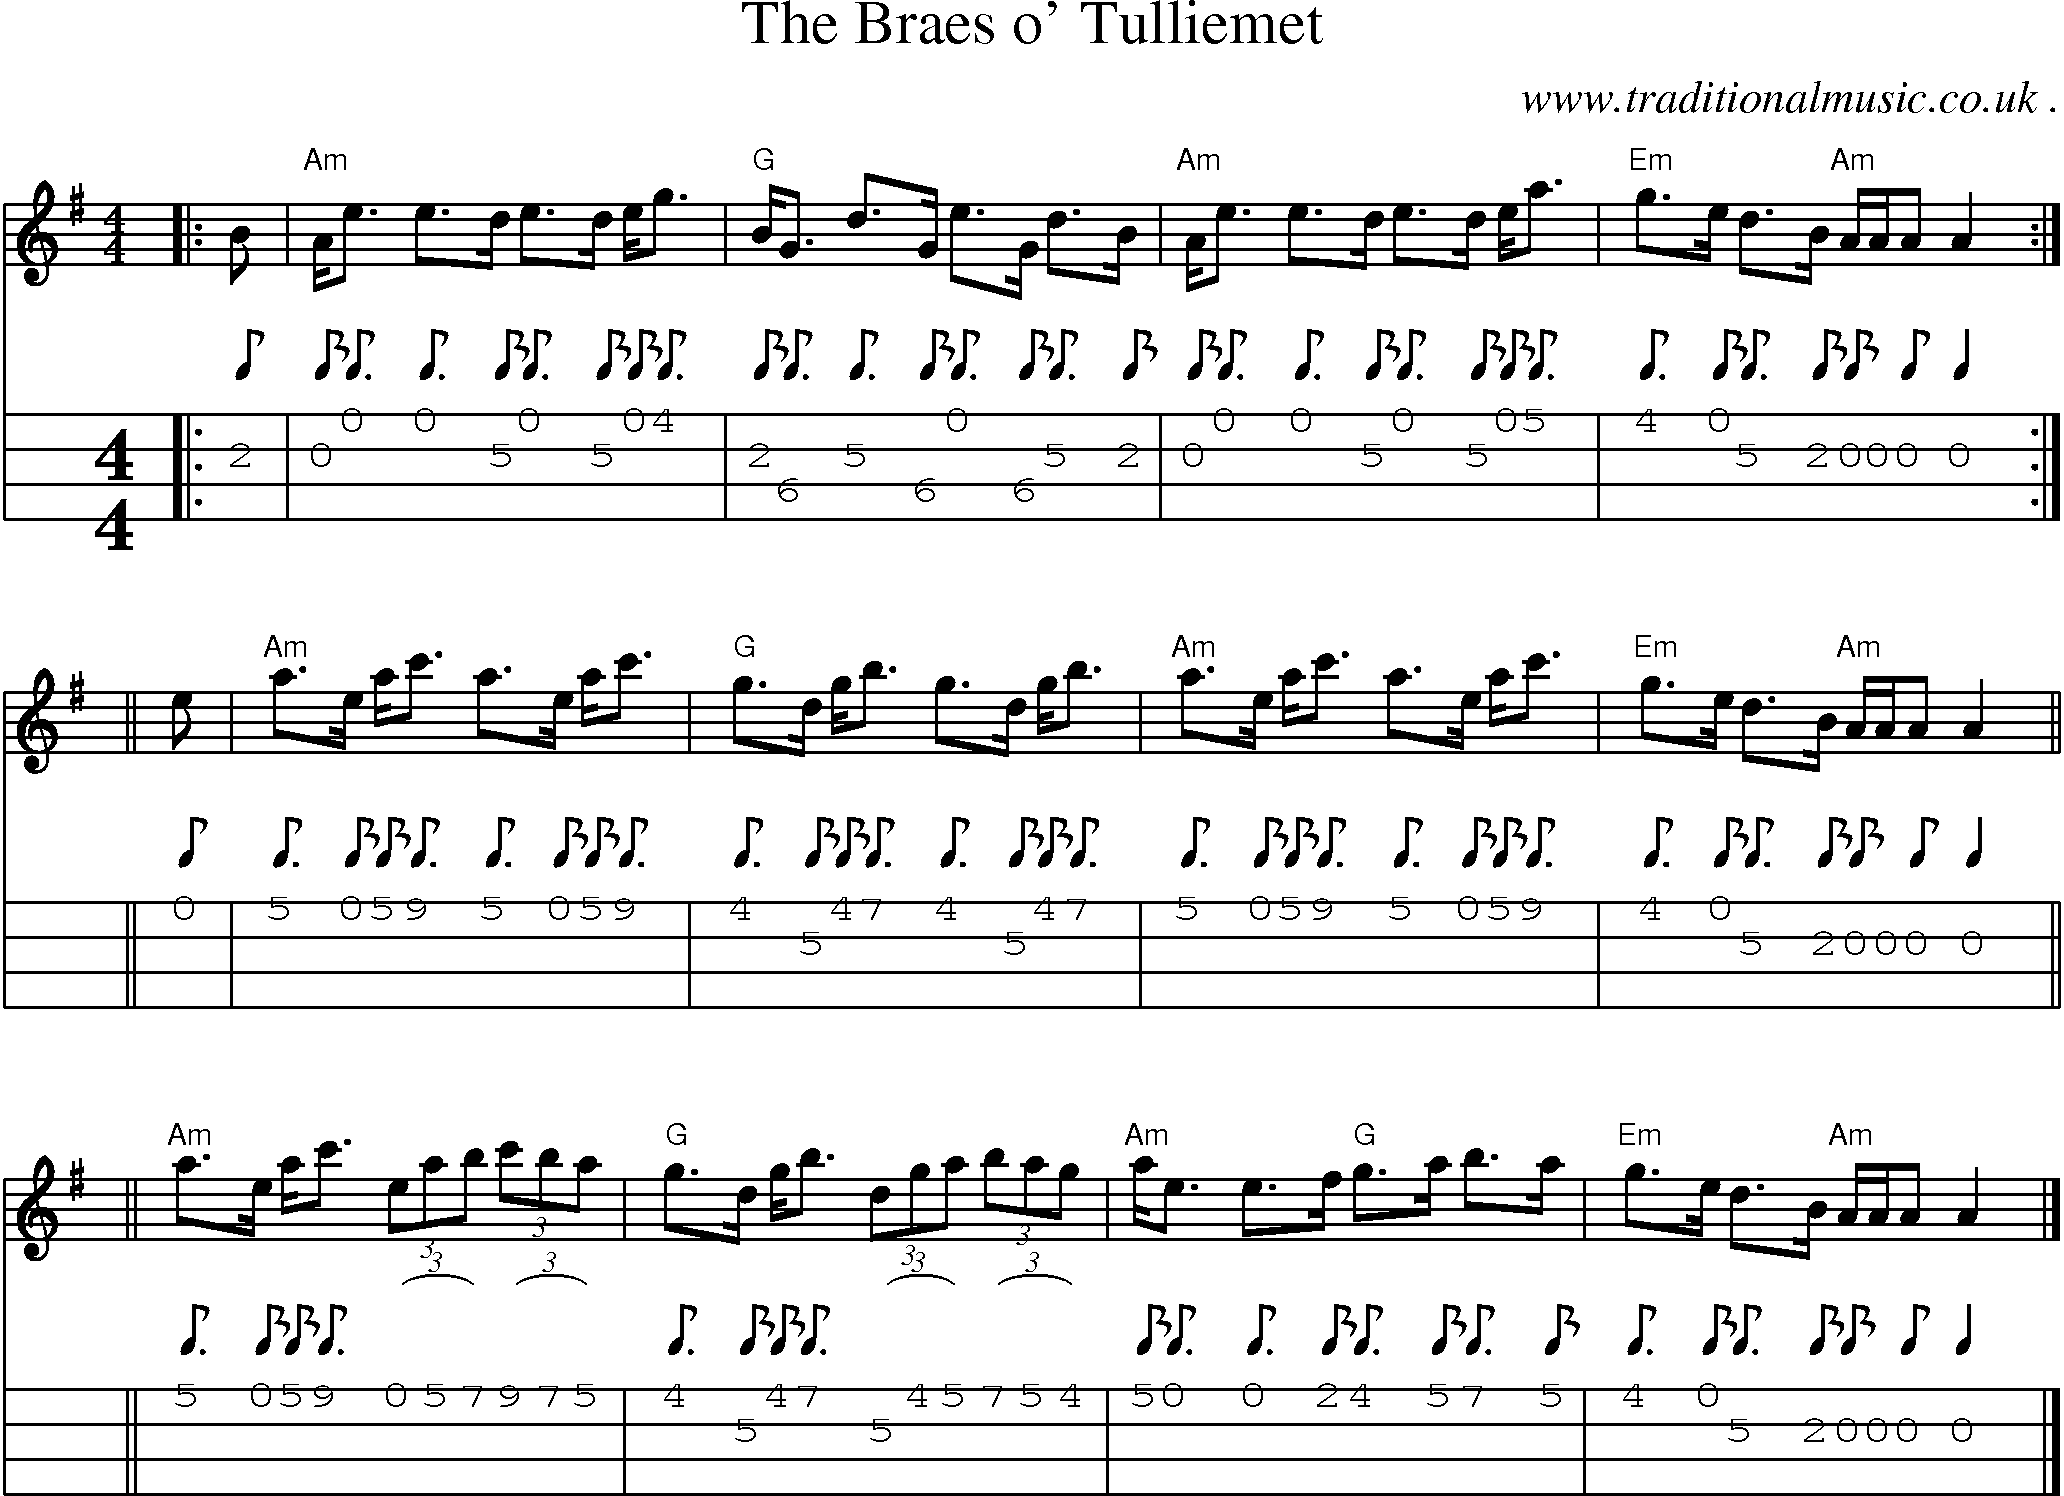 Sheet-music  score, Chords and Mandolin Tabs for The Braes O Tulliemet